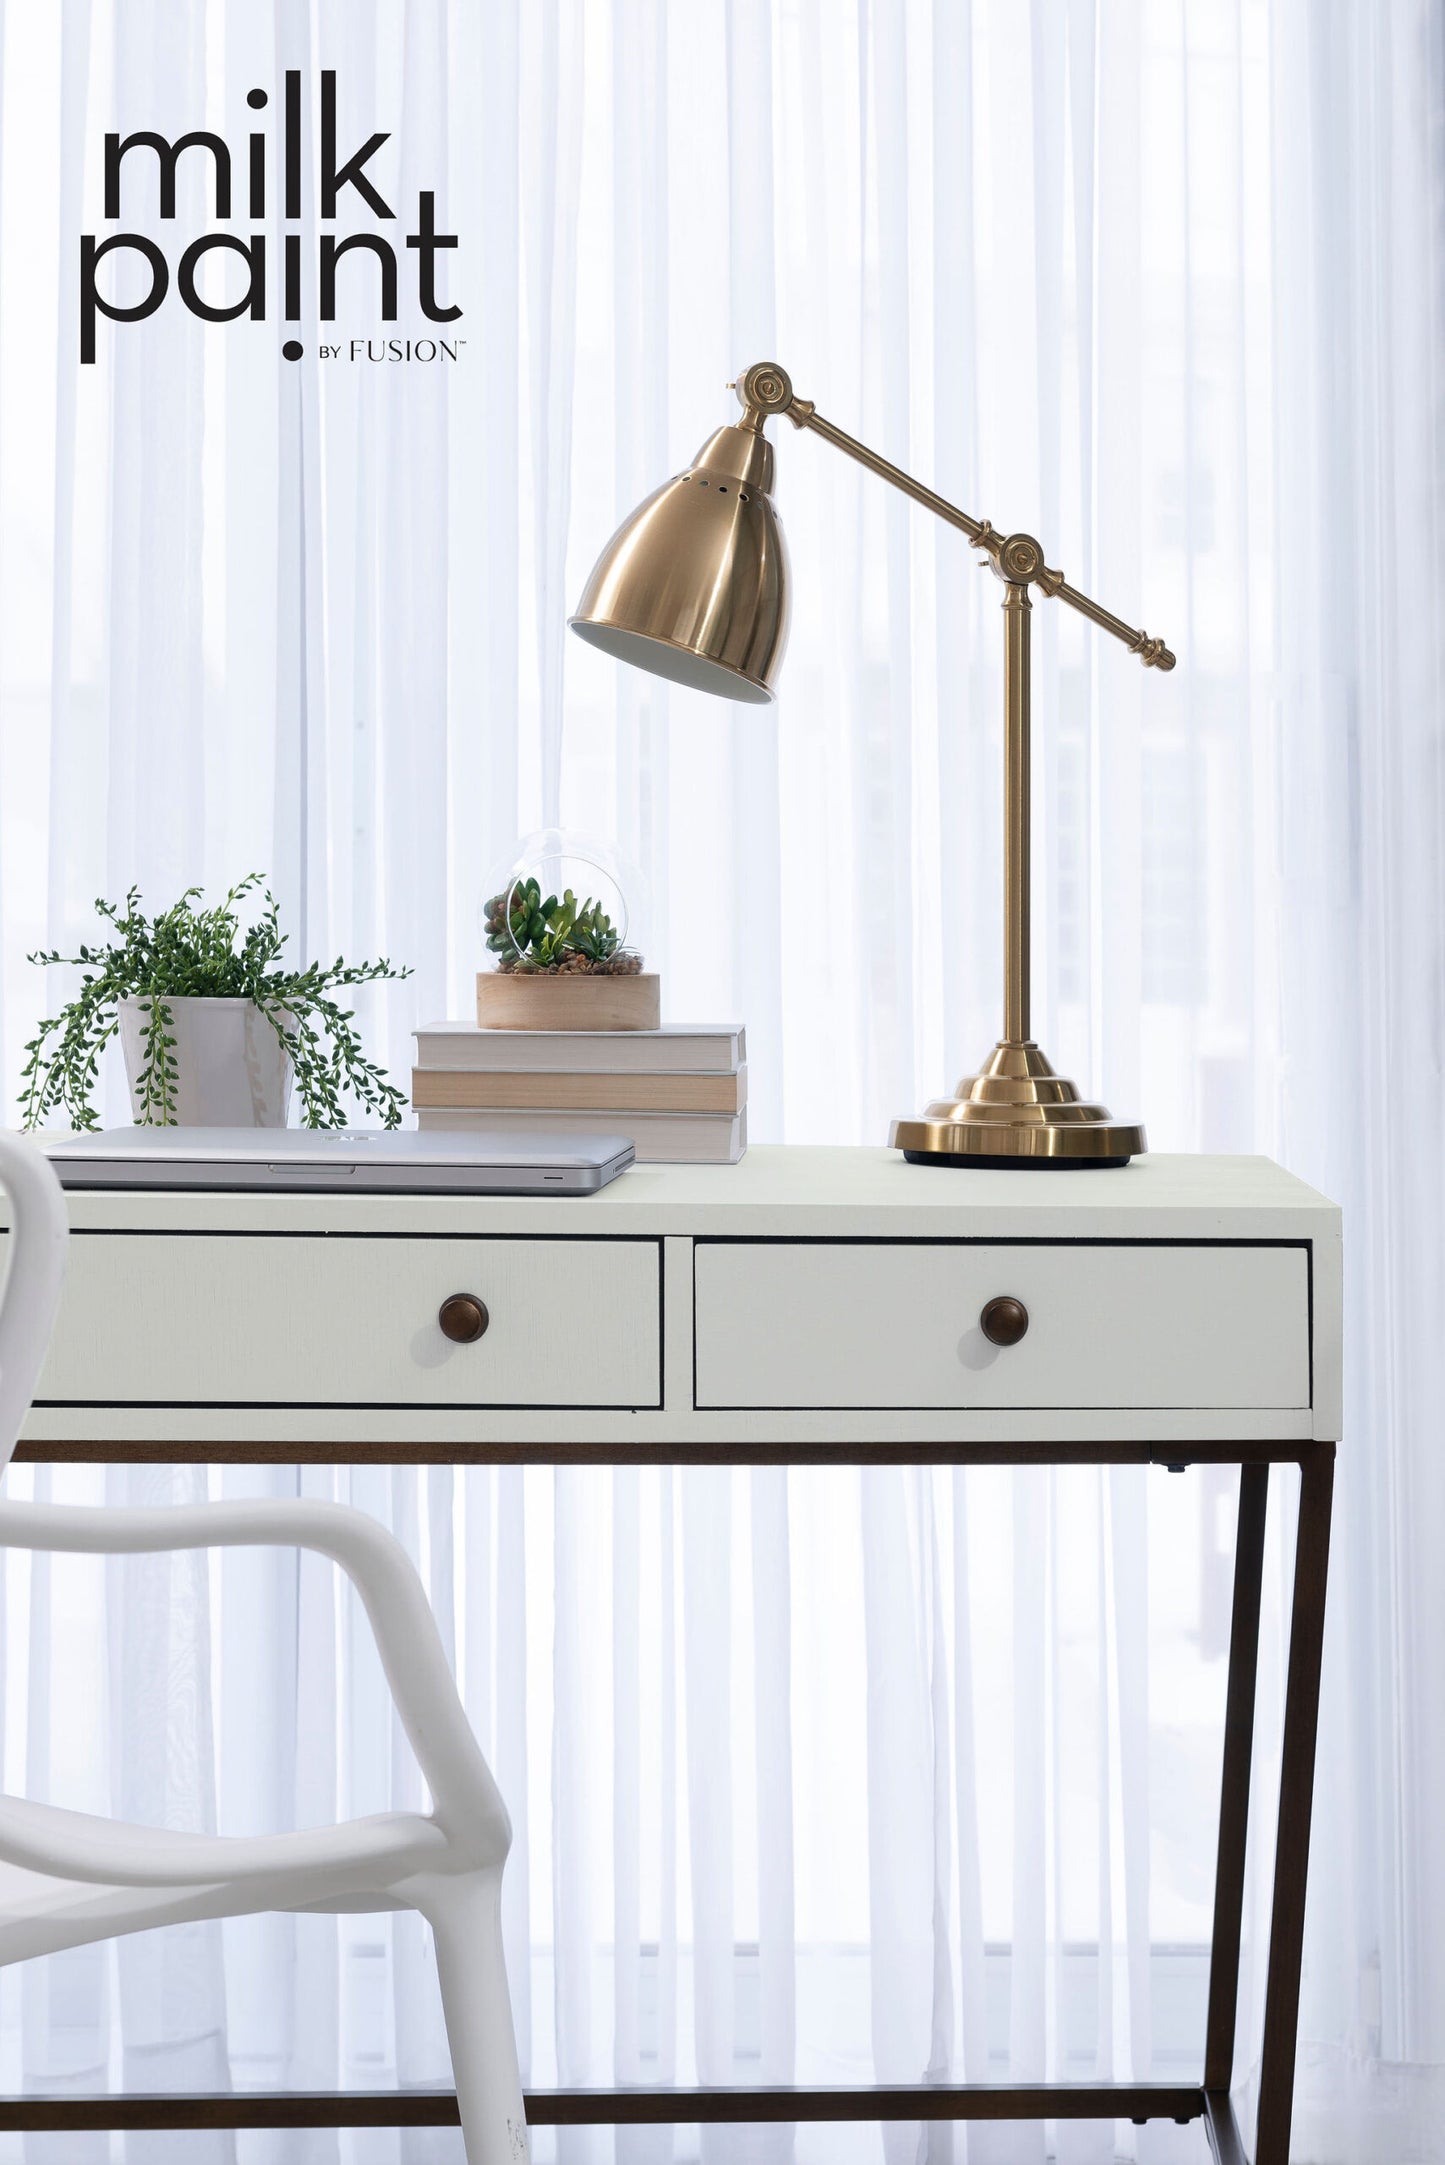 Milk Paint by Fusion - SILVER SCREEN | milk-paint-by-fusion-silver-screen | Refinished P/L